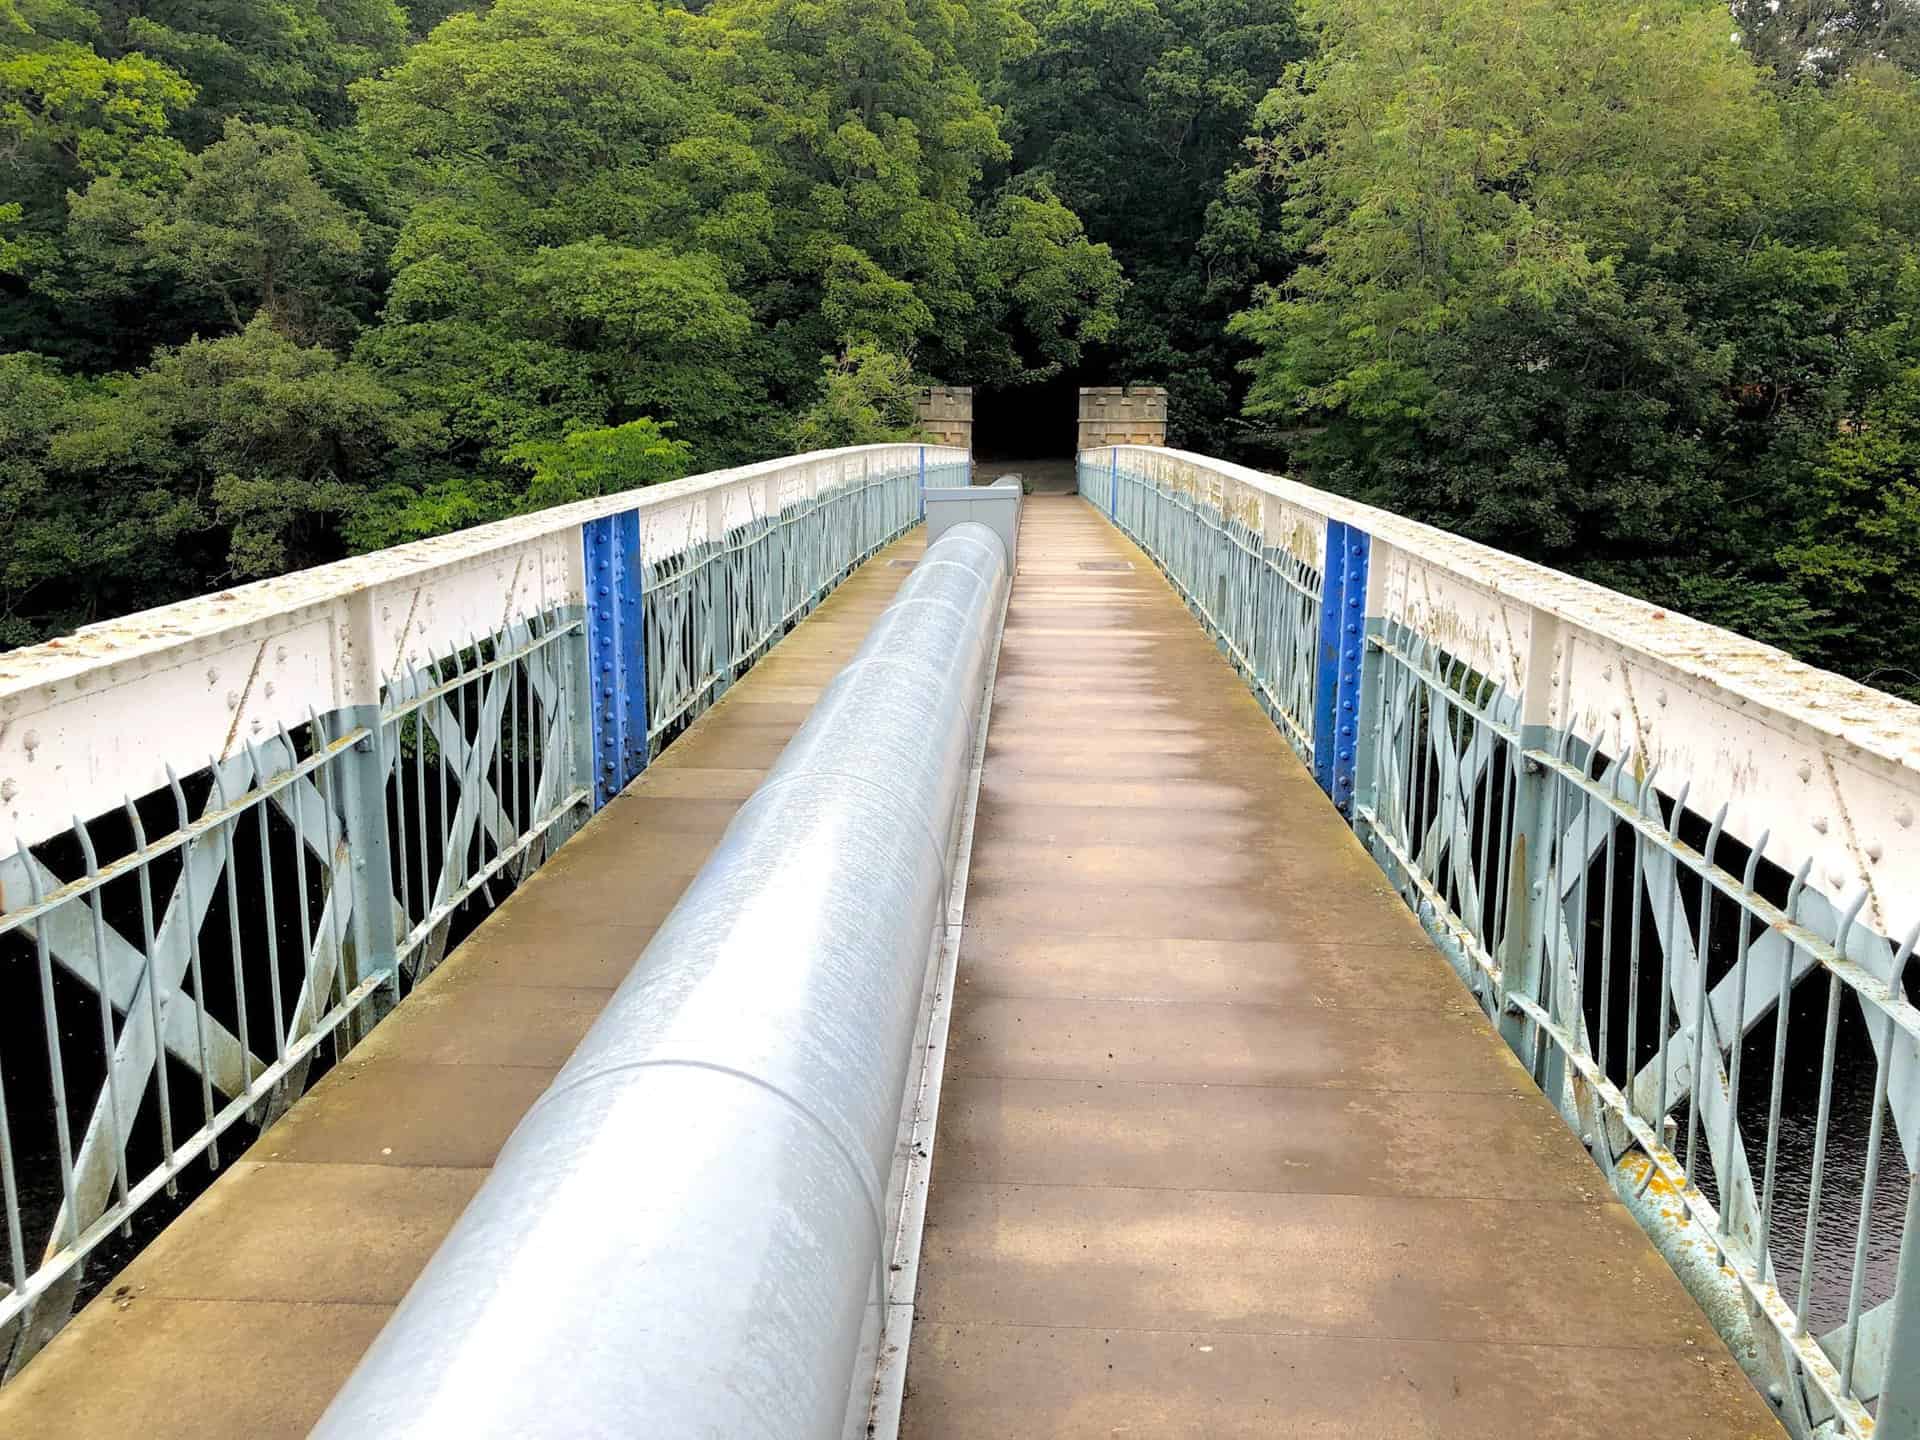 The Grade II listed Deepdale Aqueduct in Barnard Castle, constructed in the 1890s, is a Victorian cast-iron structure with a footbridge designed to transport water from the County Durham hills to Middlesbrough and Stockton-on-Tees. It's a notable feature of this Barnard Castle walk.